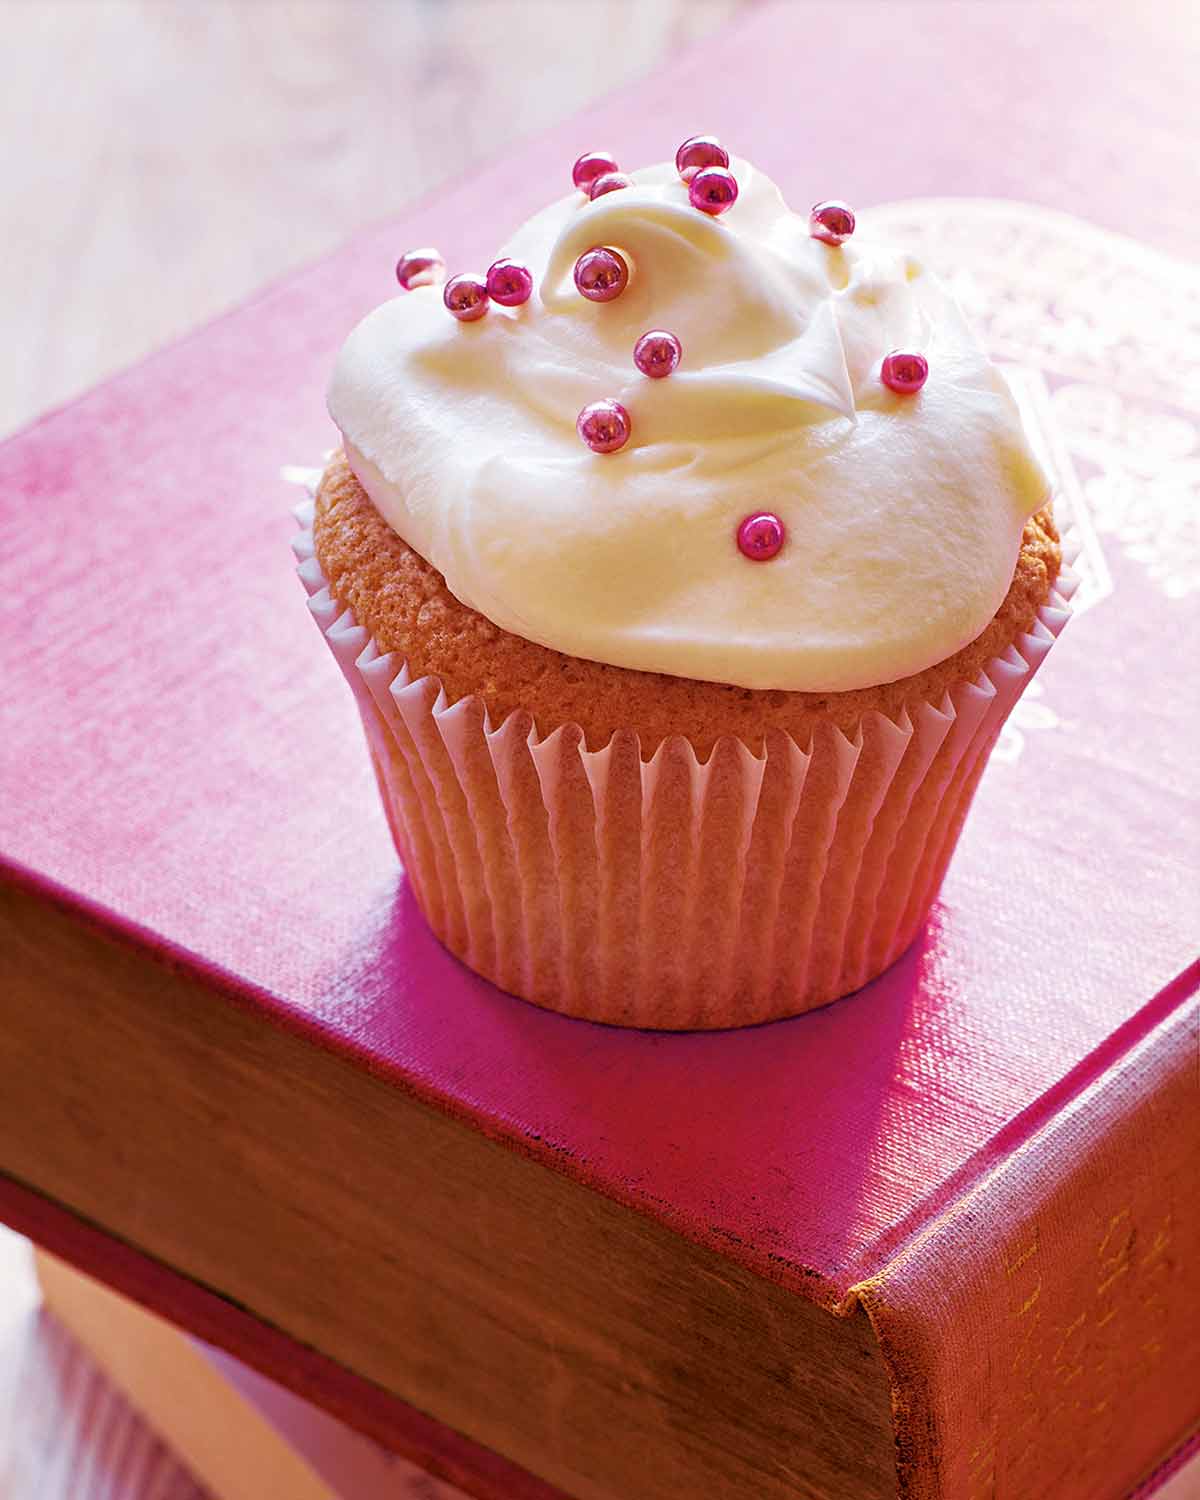 A vanilla cupcake decorated with white frosting and pink sprinkles on a red book.